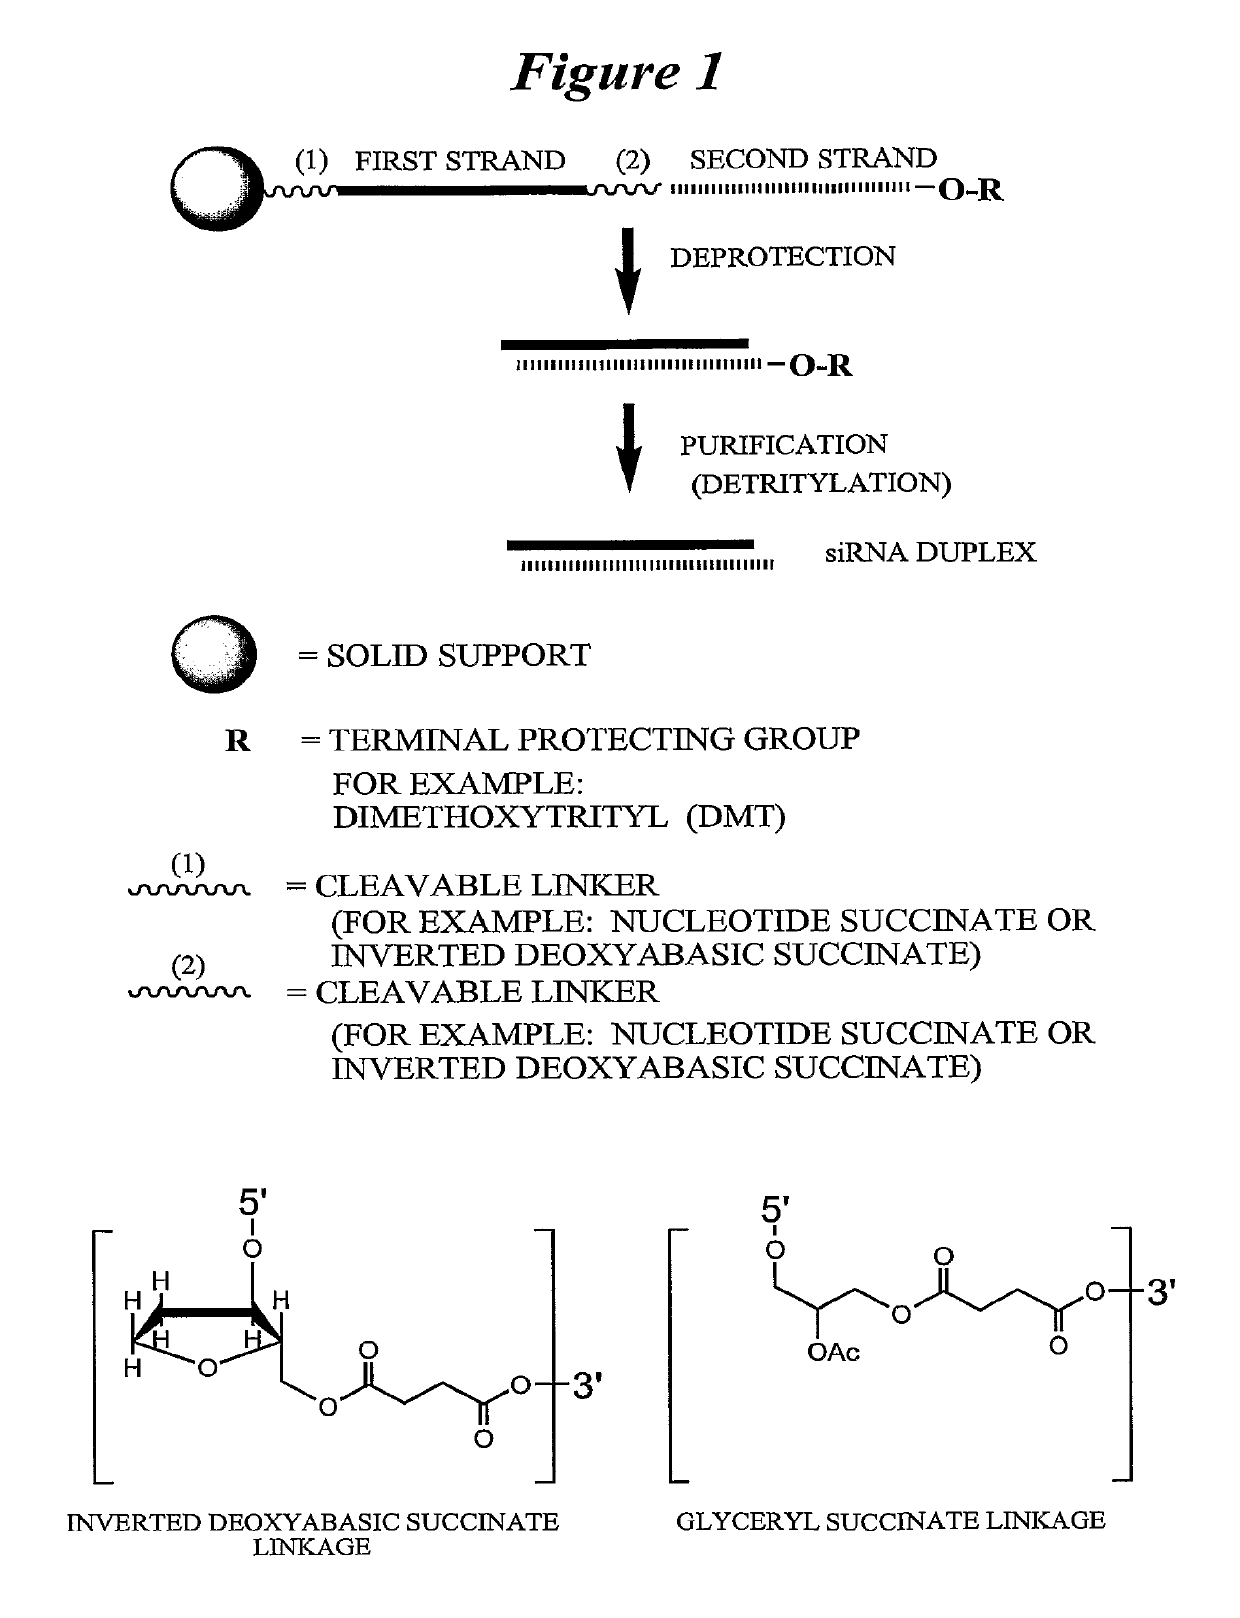 Chemically modified multifunctional short interfering nucleic acid molecules that mediate RNA interference